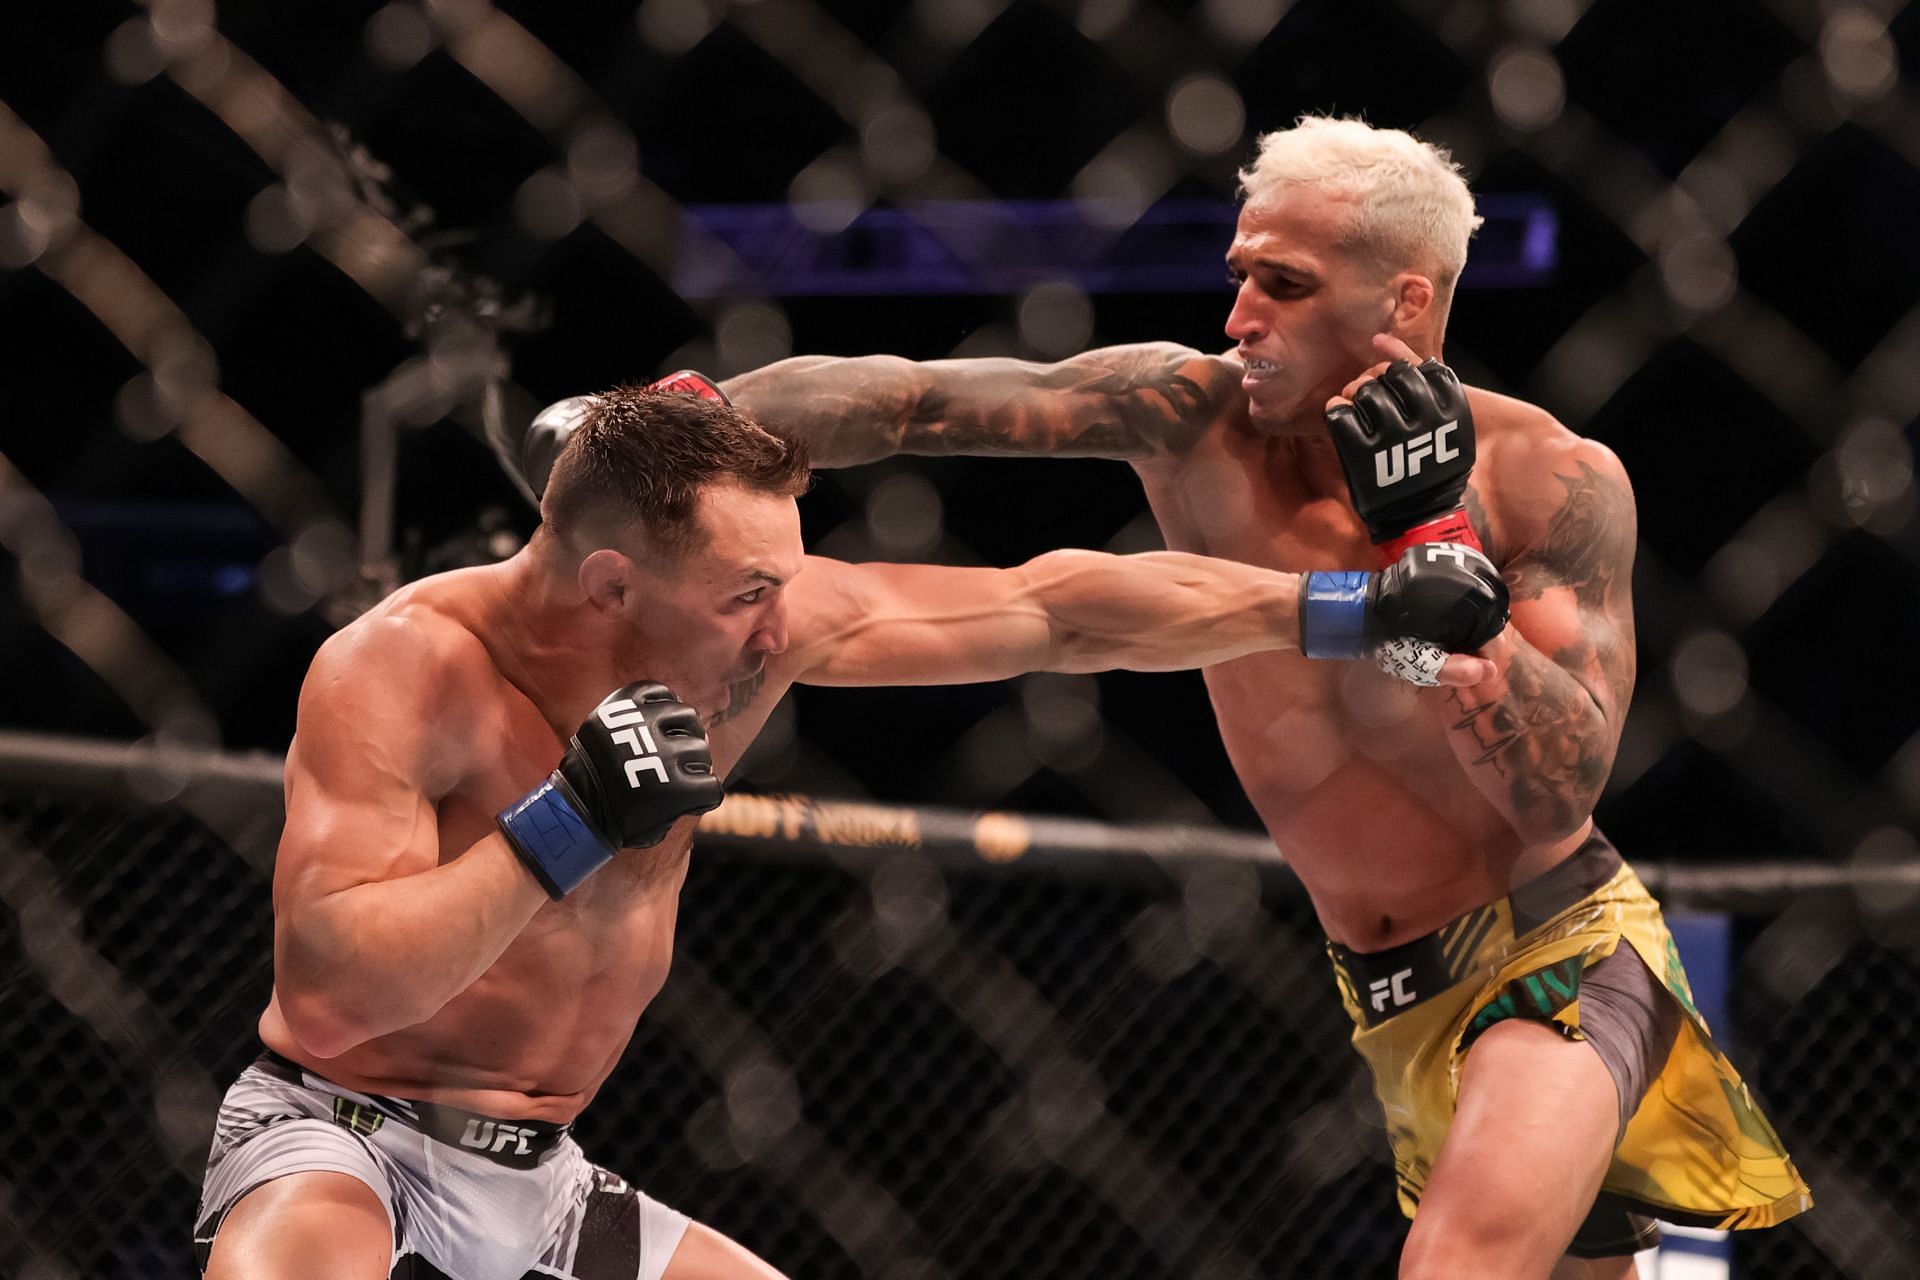 Charles Oliveira made a dramatic comeback to beat Michael Chandler at UFC 262